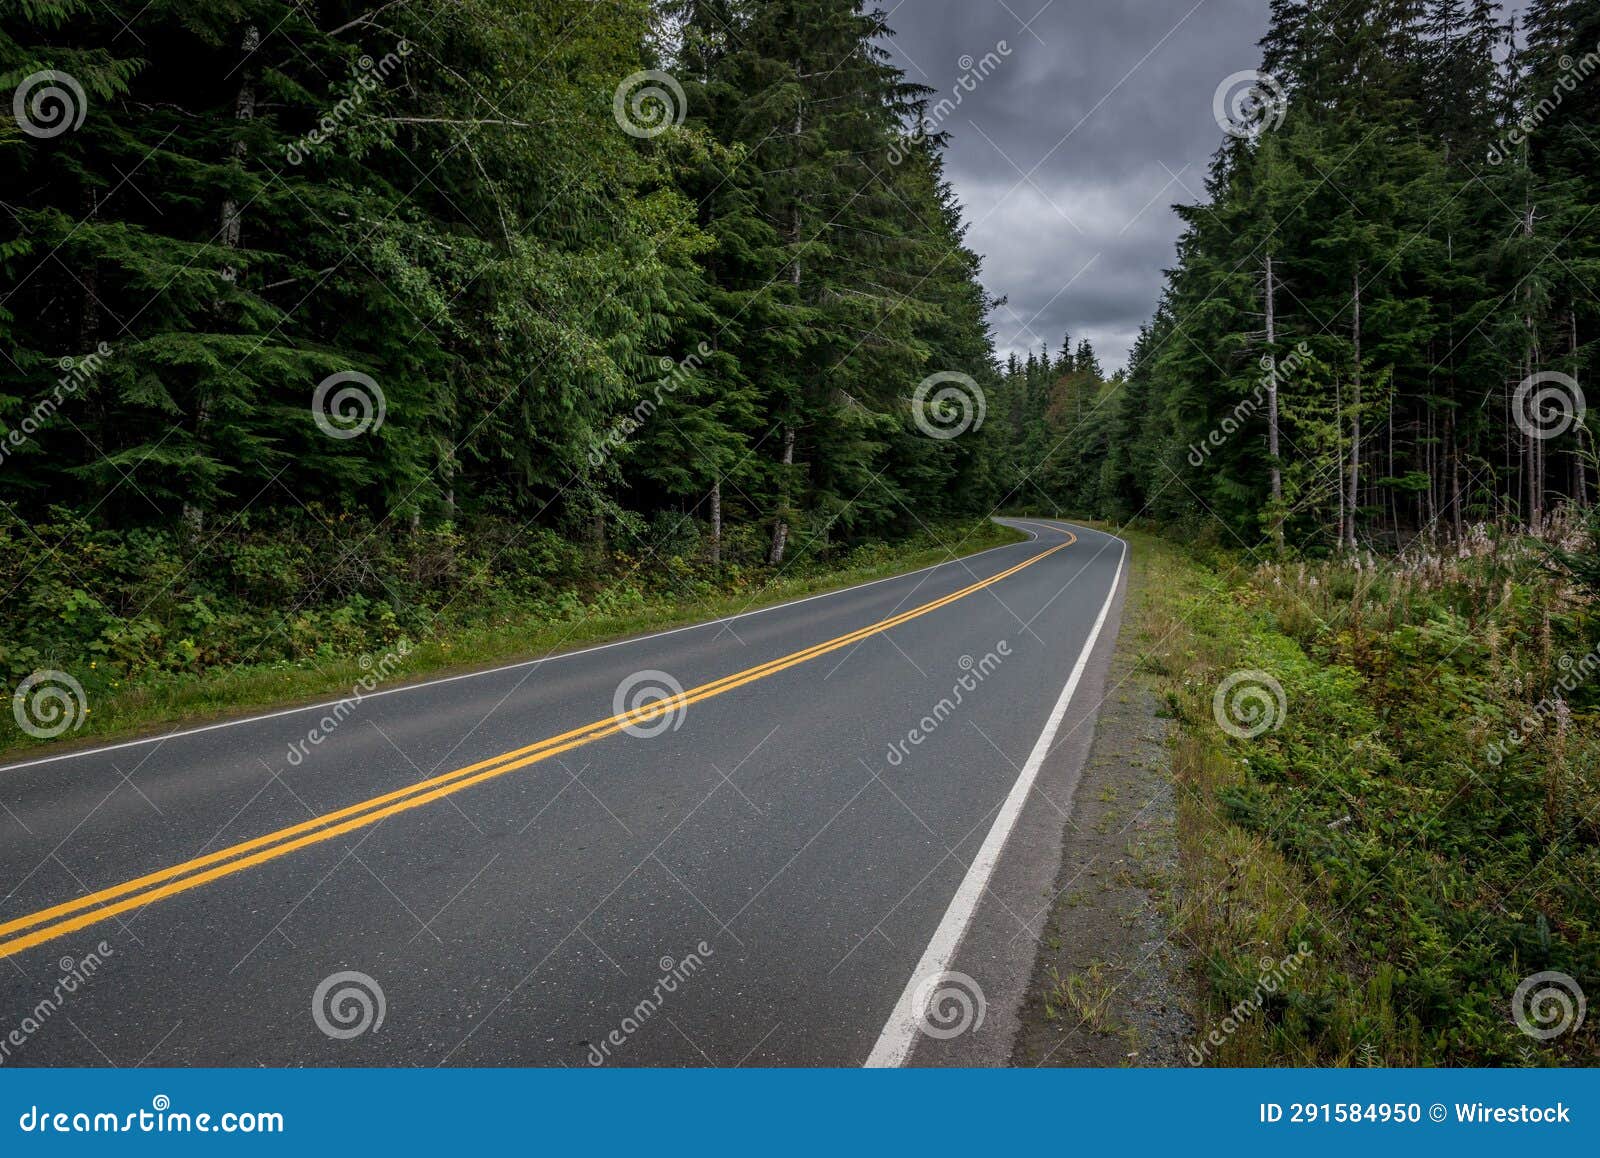 scenic road with a bright yellow centerline winding through a lush forest.